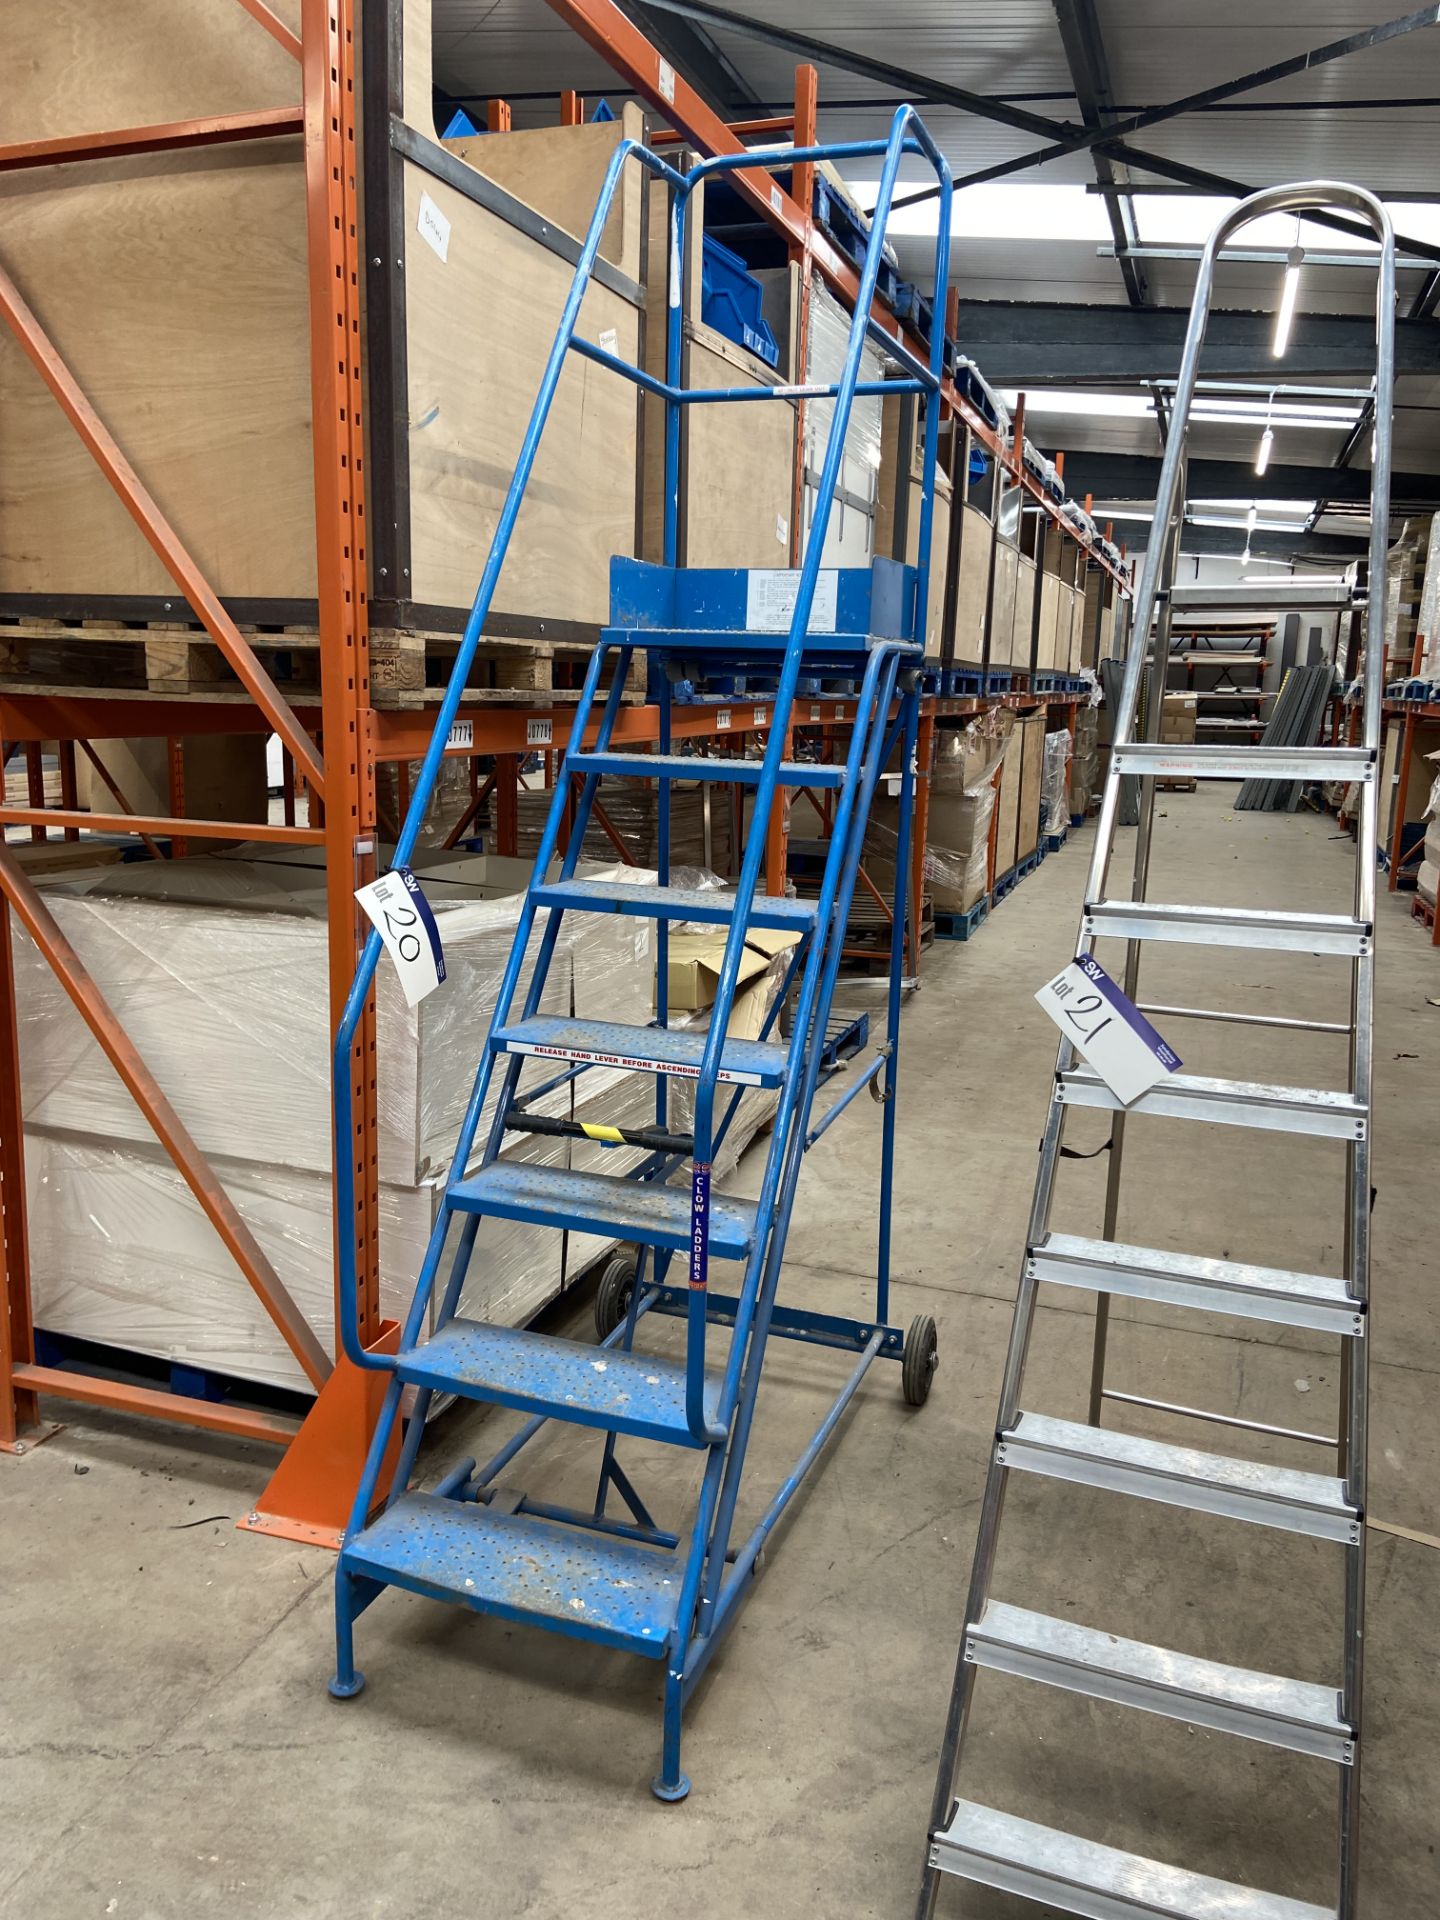 Klime-ezee Seven Rise Warehouse Ladder (reserve removal until Friday 11 August 2023), Lot located